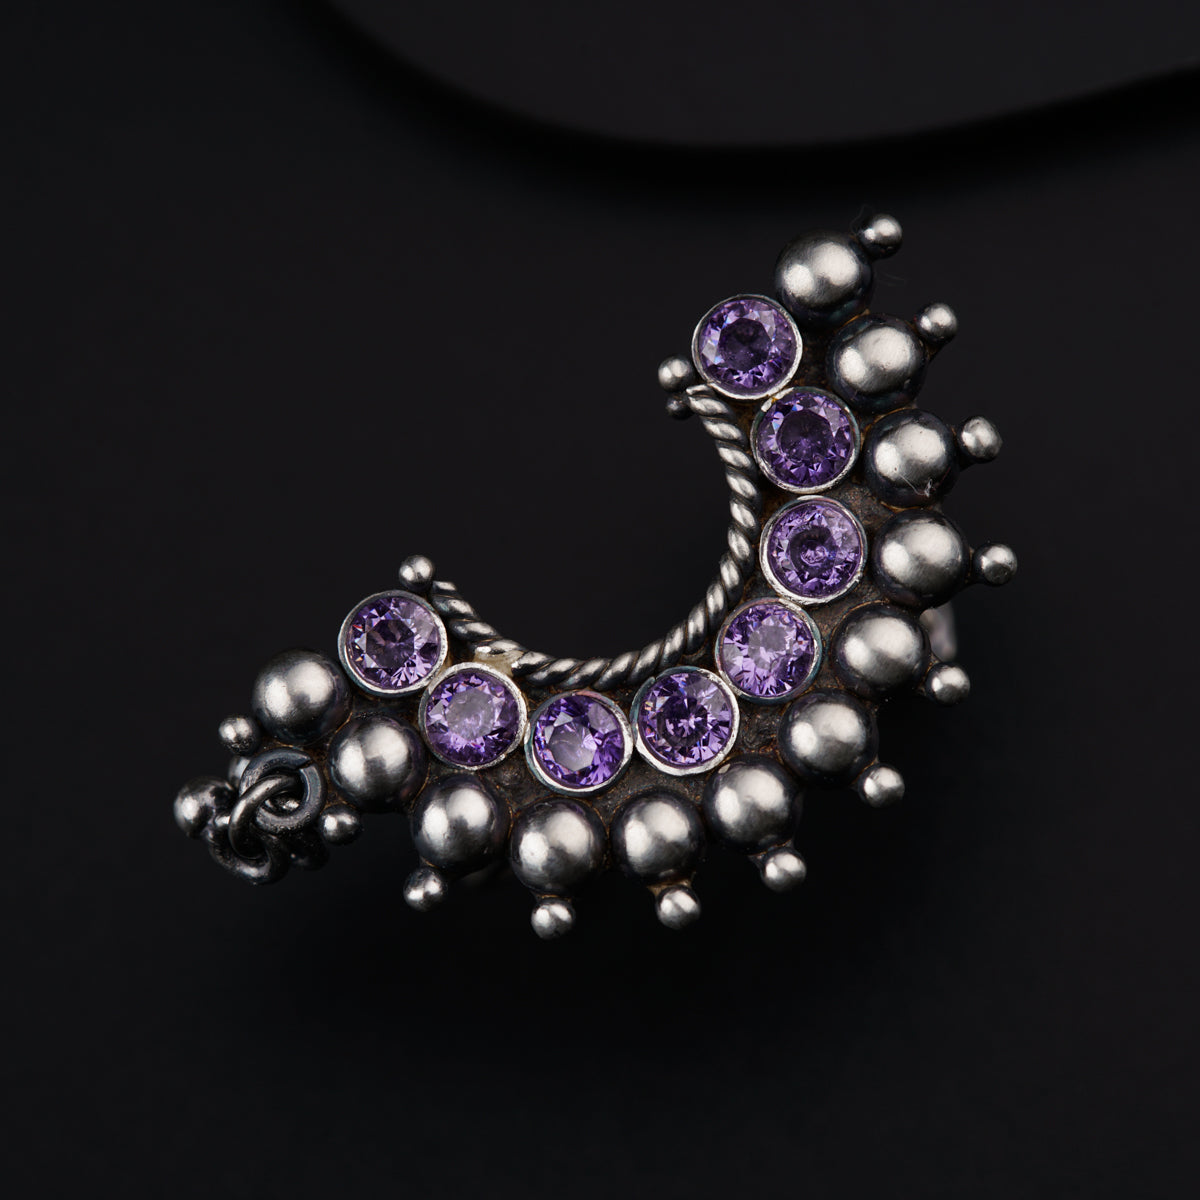 a silver brooch with purple stones on a black background